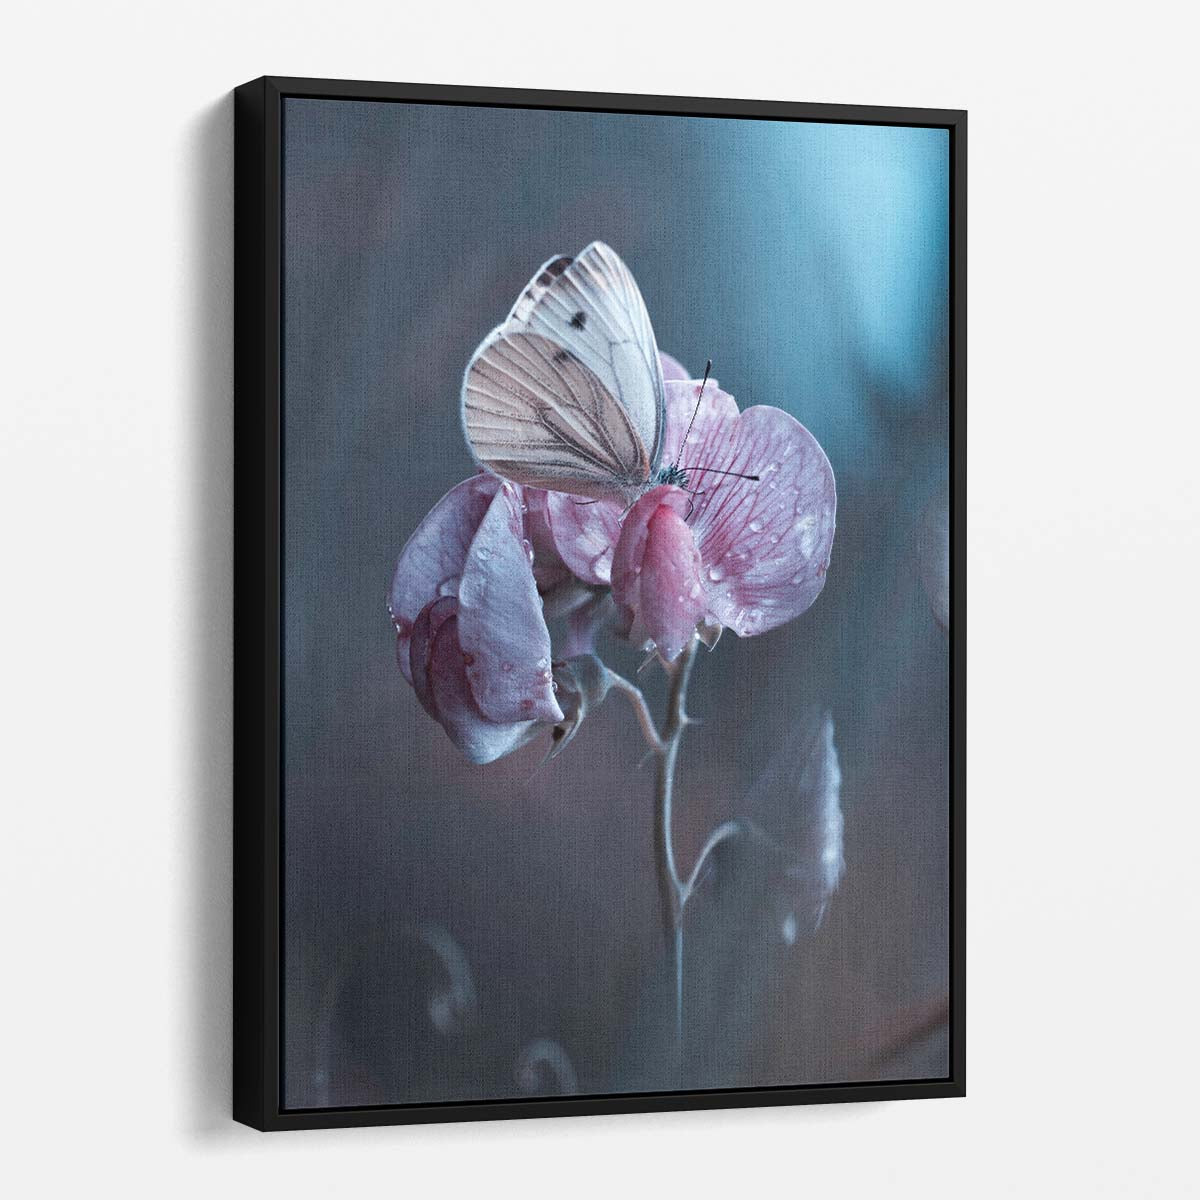 Macro Photography of Pink Flower, Butterfly with Dew Drops by Luxuriance Designs, made in USA